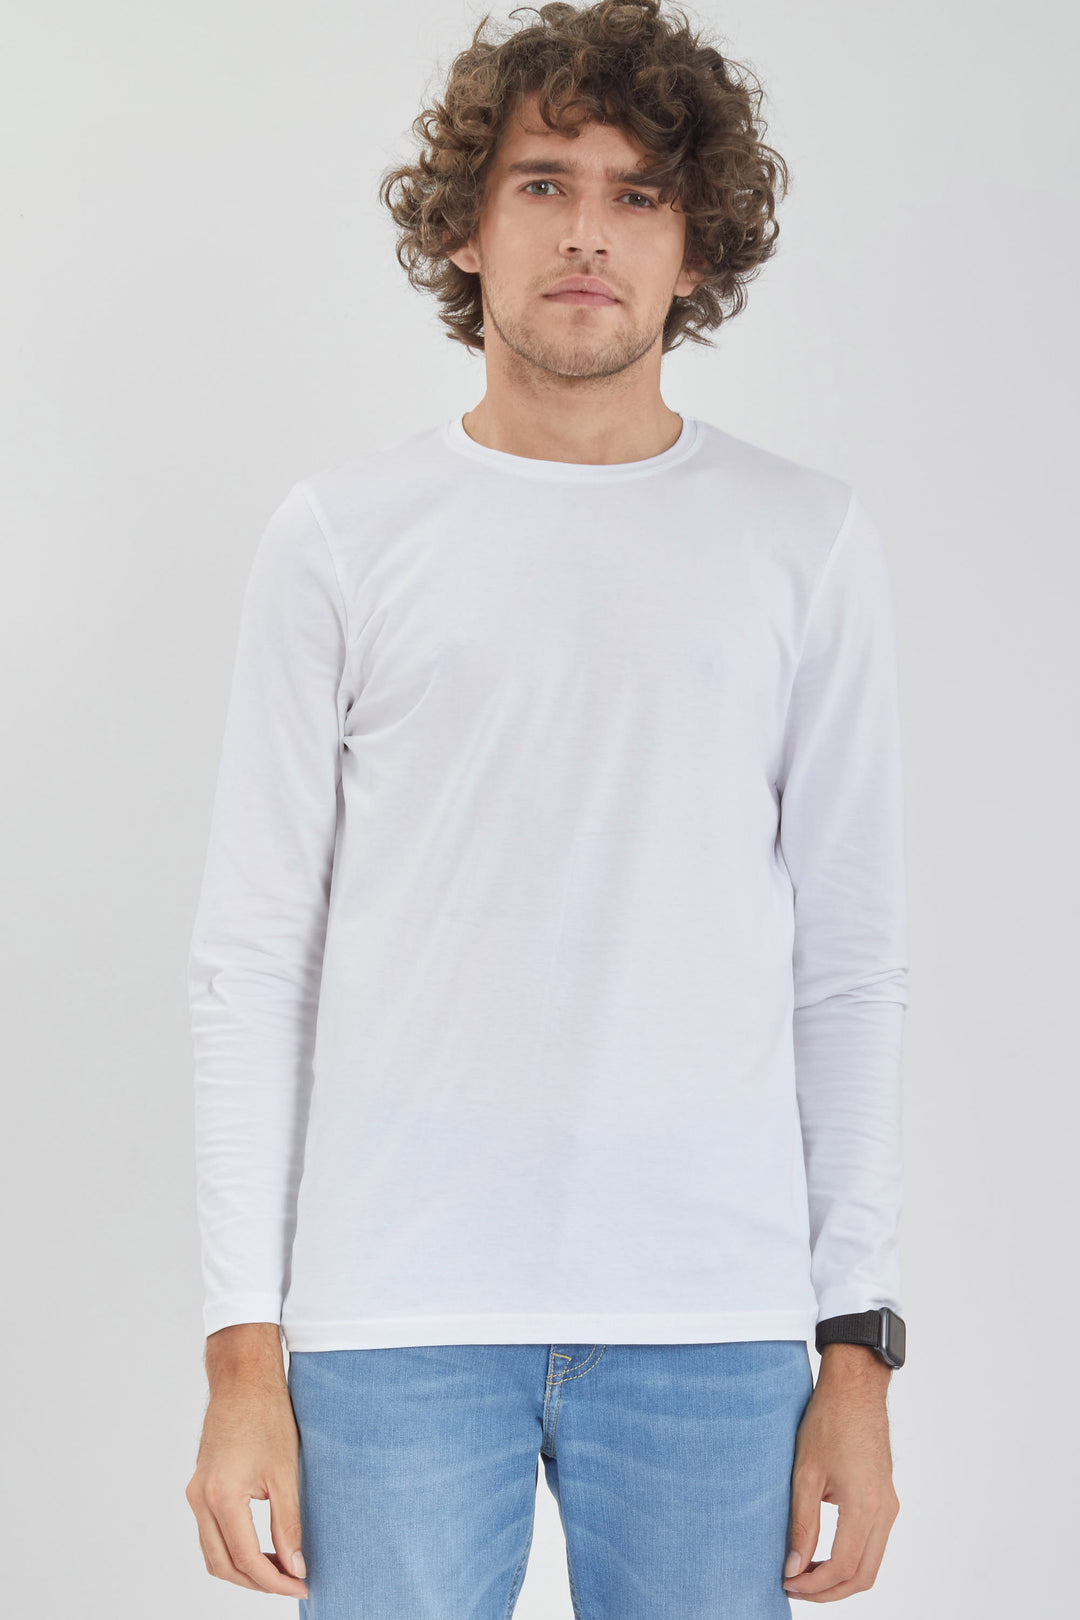 White Full Sleeves 4-way Stretch Crew Neck T-Shirt - SNITCH